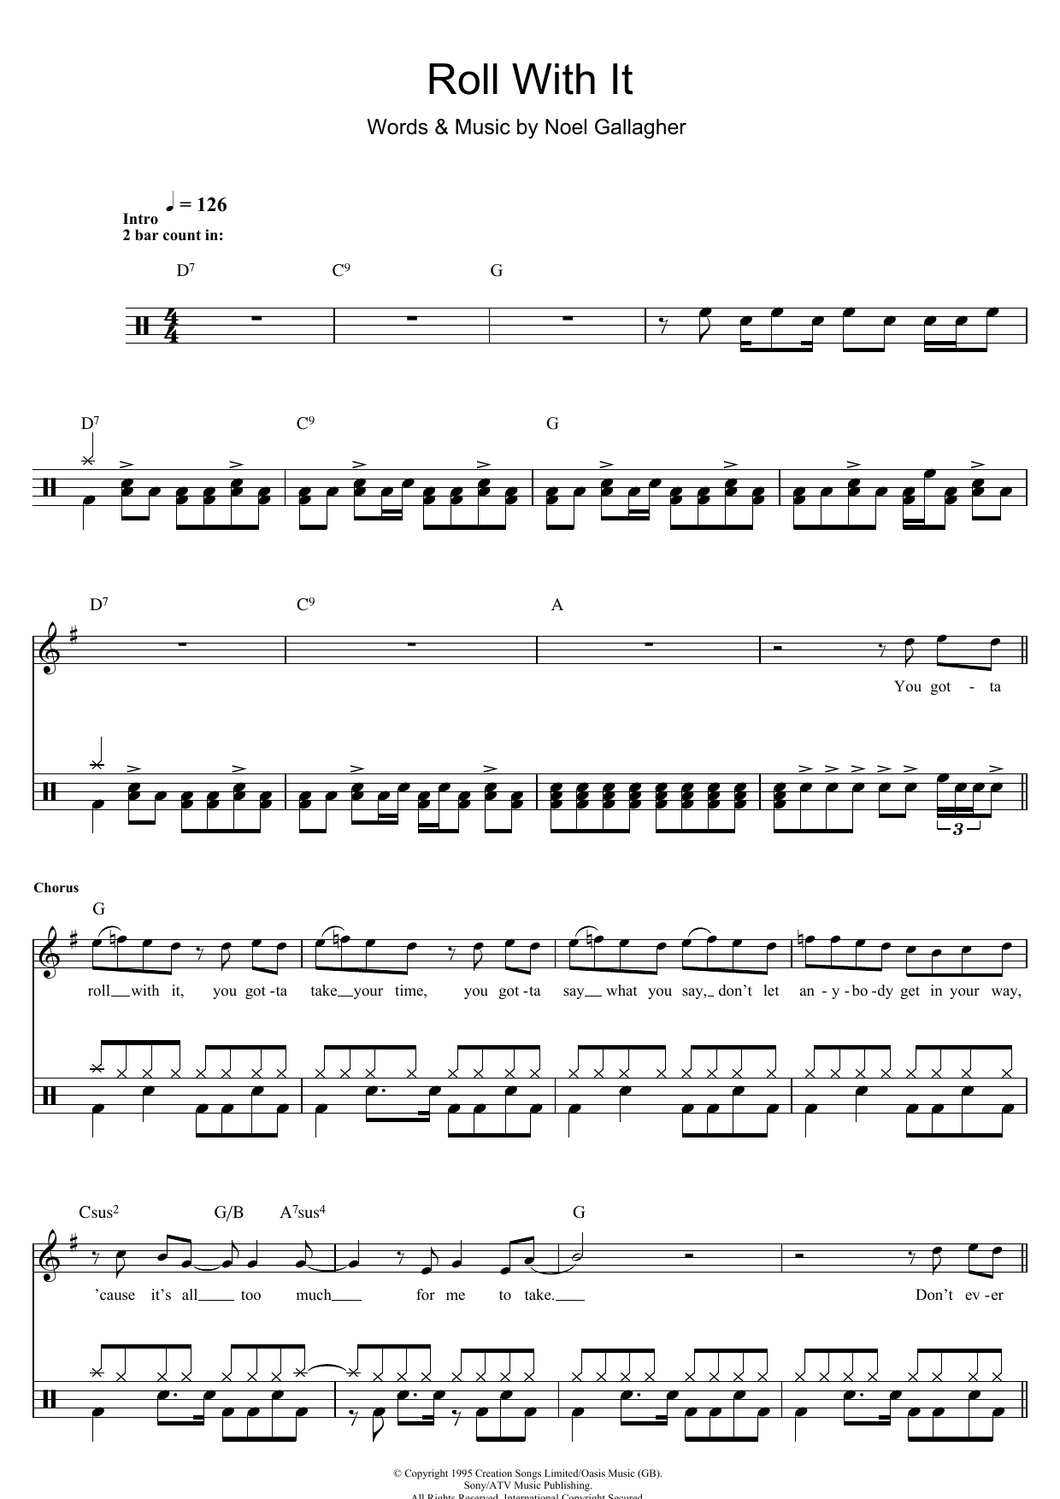 Roll with It - Oasis - Full Drum Transcription / Drum Sheet Music - SheetMusicDirect D